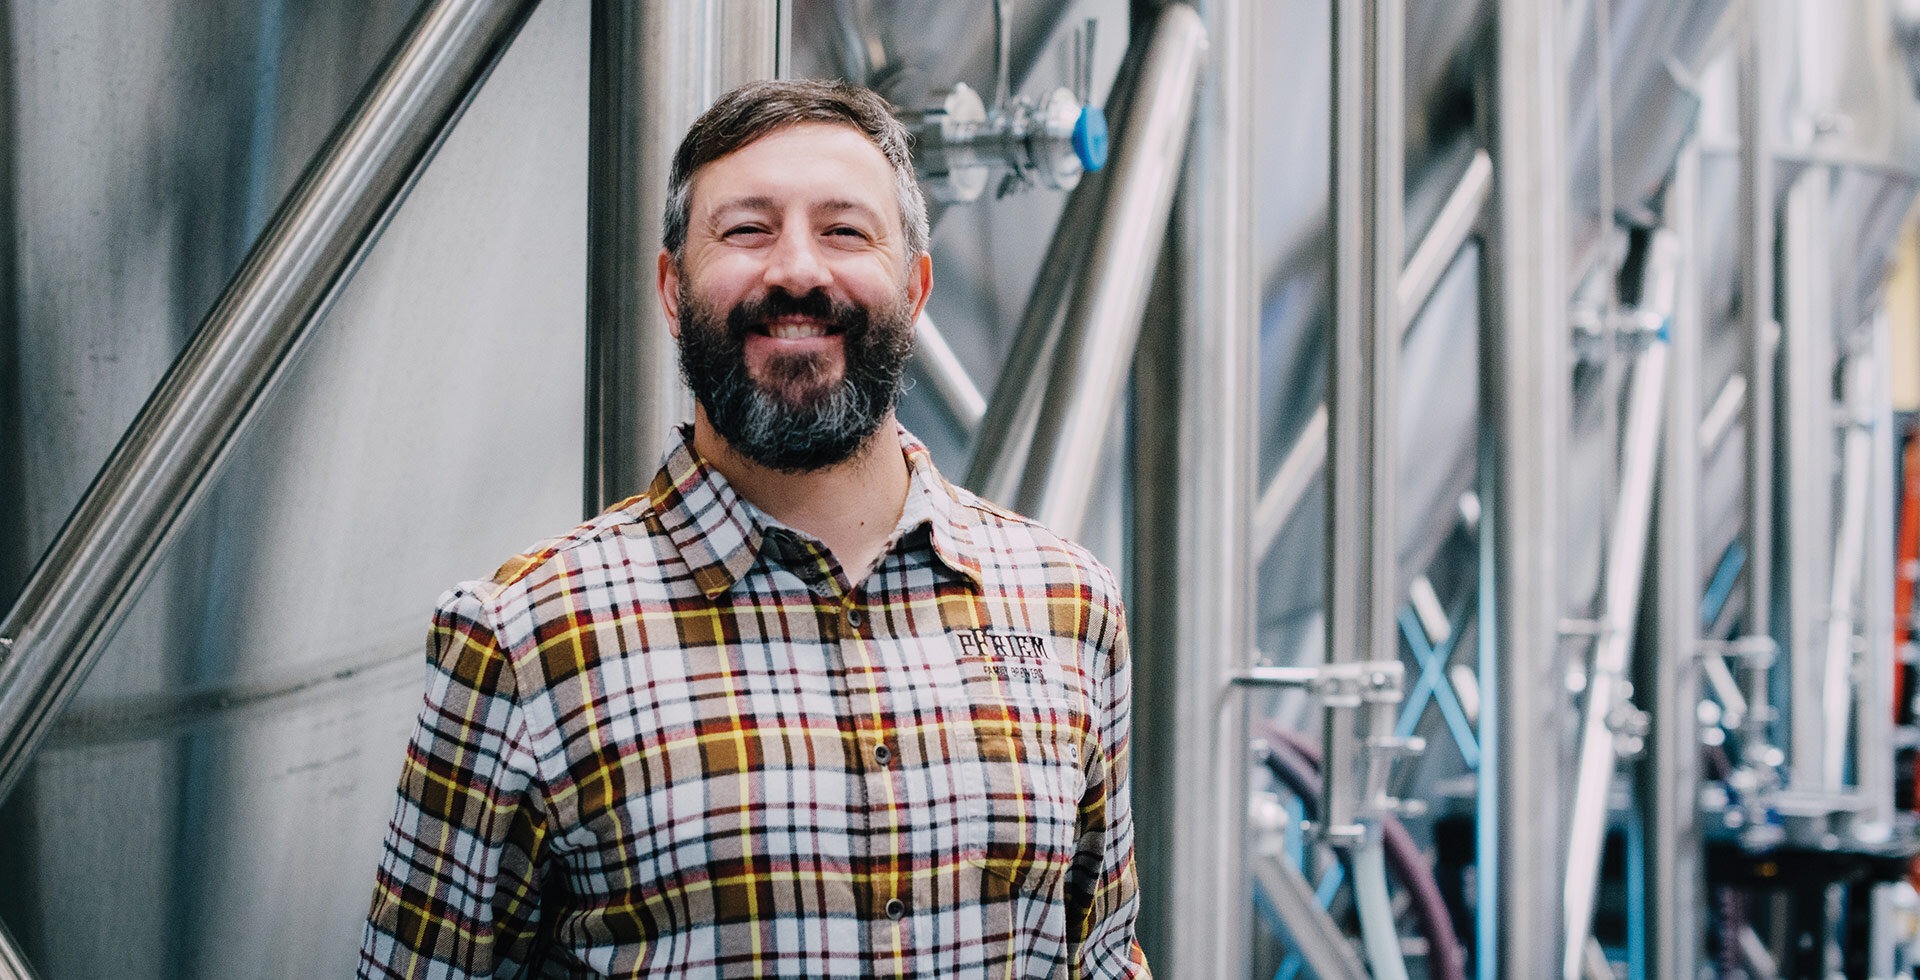 Josh Pfriem Reflects on the Intersection of Beer and Culture